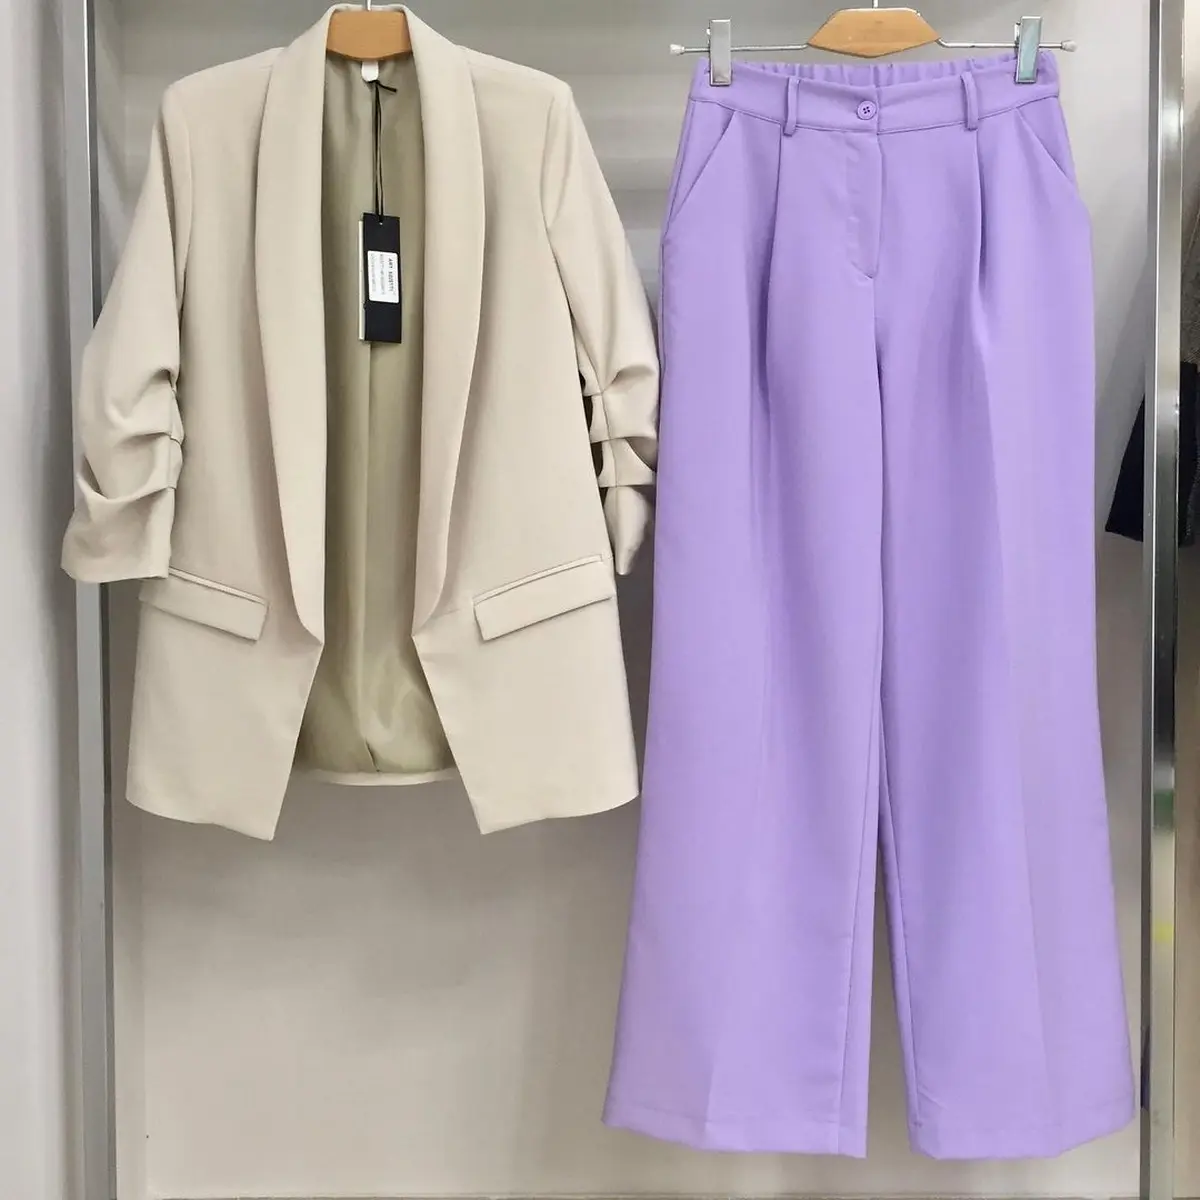 What color goes with purple pants? Best outfit ideas for females